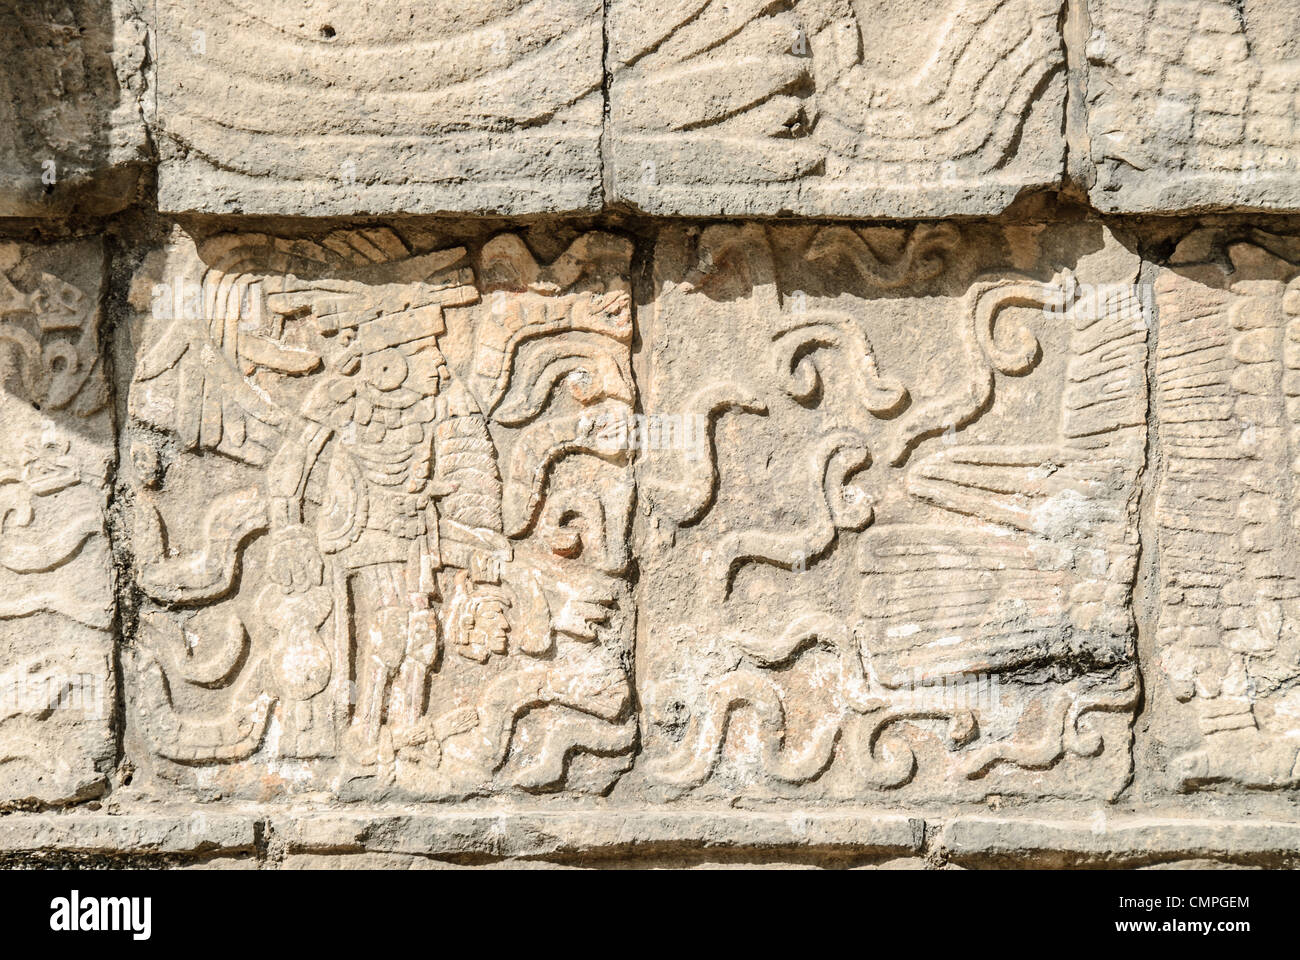 CHICHEN ITZA, Mexico - Winged warrior carving in a stone wall at Chichen Itza Mayan ruins, Mexico. Stock Photo